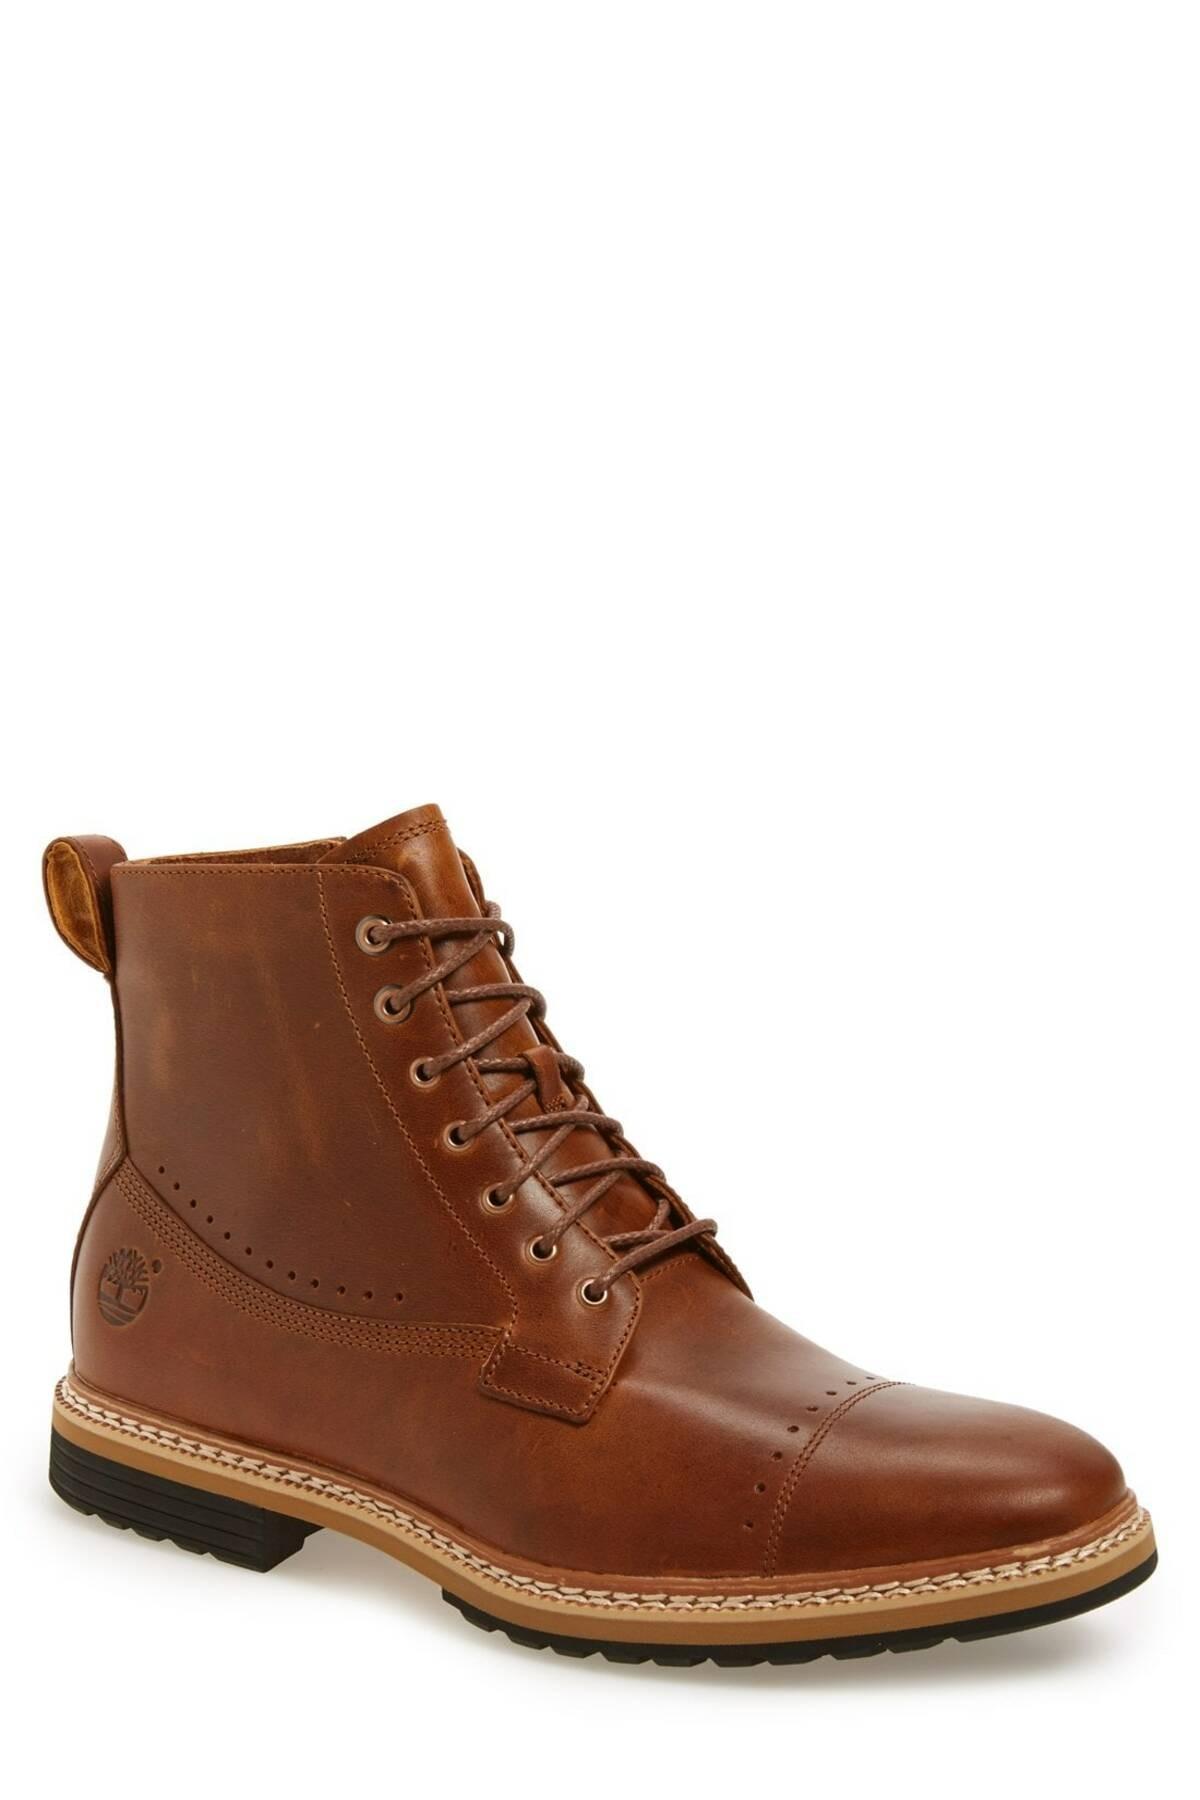 timberland westhaven 6